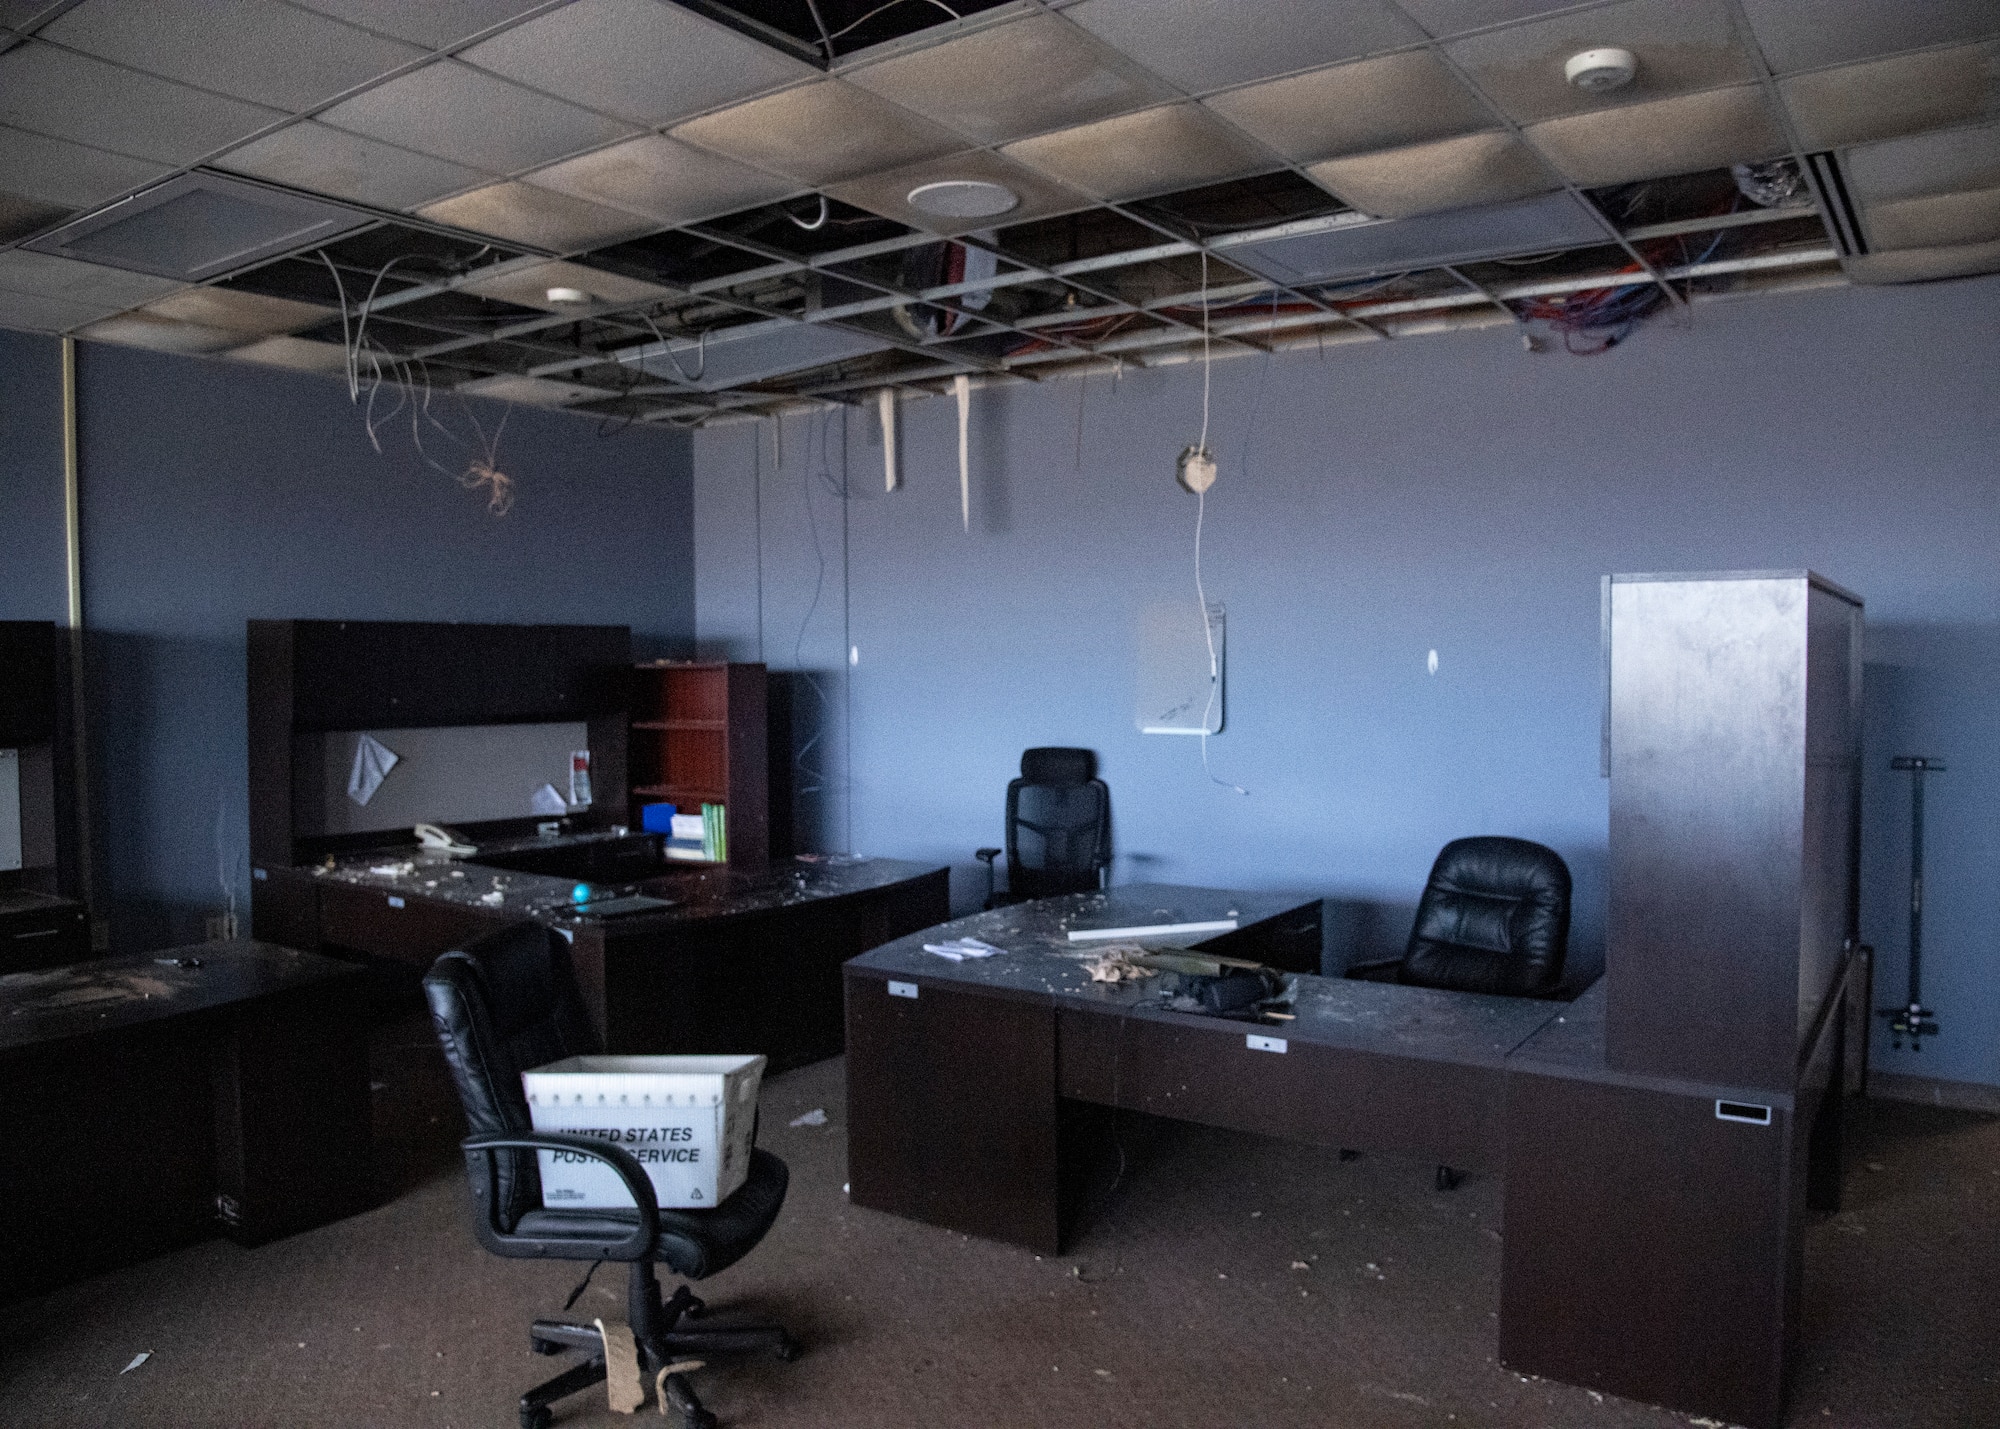 A photo of a damaged office within the Aerospace Ground Equipment schoolhouse at Sheppard Air Force Base, Texas, March 4, 2021. The Feb. 14, 2021, snowstorm damaged the AGE schoolhouse leaving it defunct. Some of AGE's labs for training have recently been cleared for use, but the main corridor that held most of the classrooms and offices for the 361st Training Squadron's faculty is still devastated and will stay unused for quite some time. (U.S. Air Force photo by Senior Airman Pedro Tenorio)